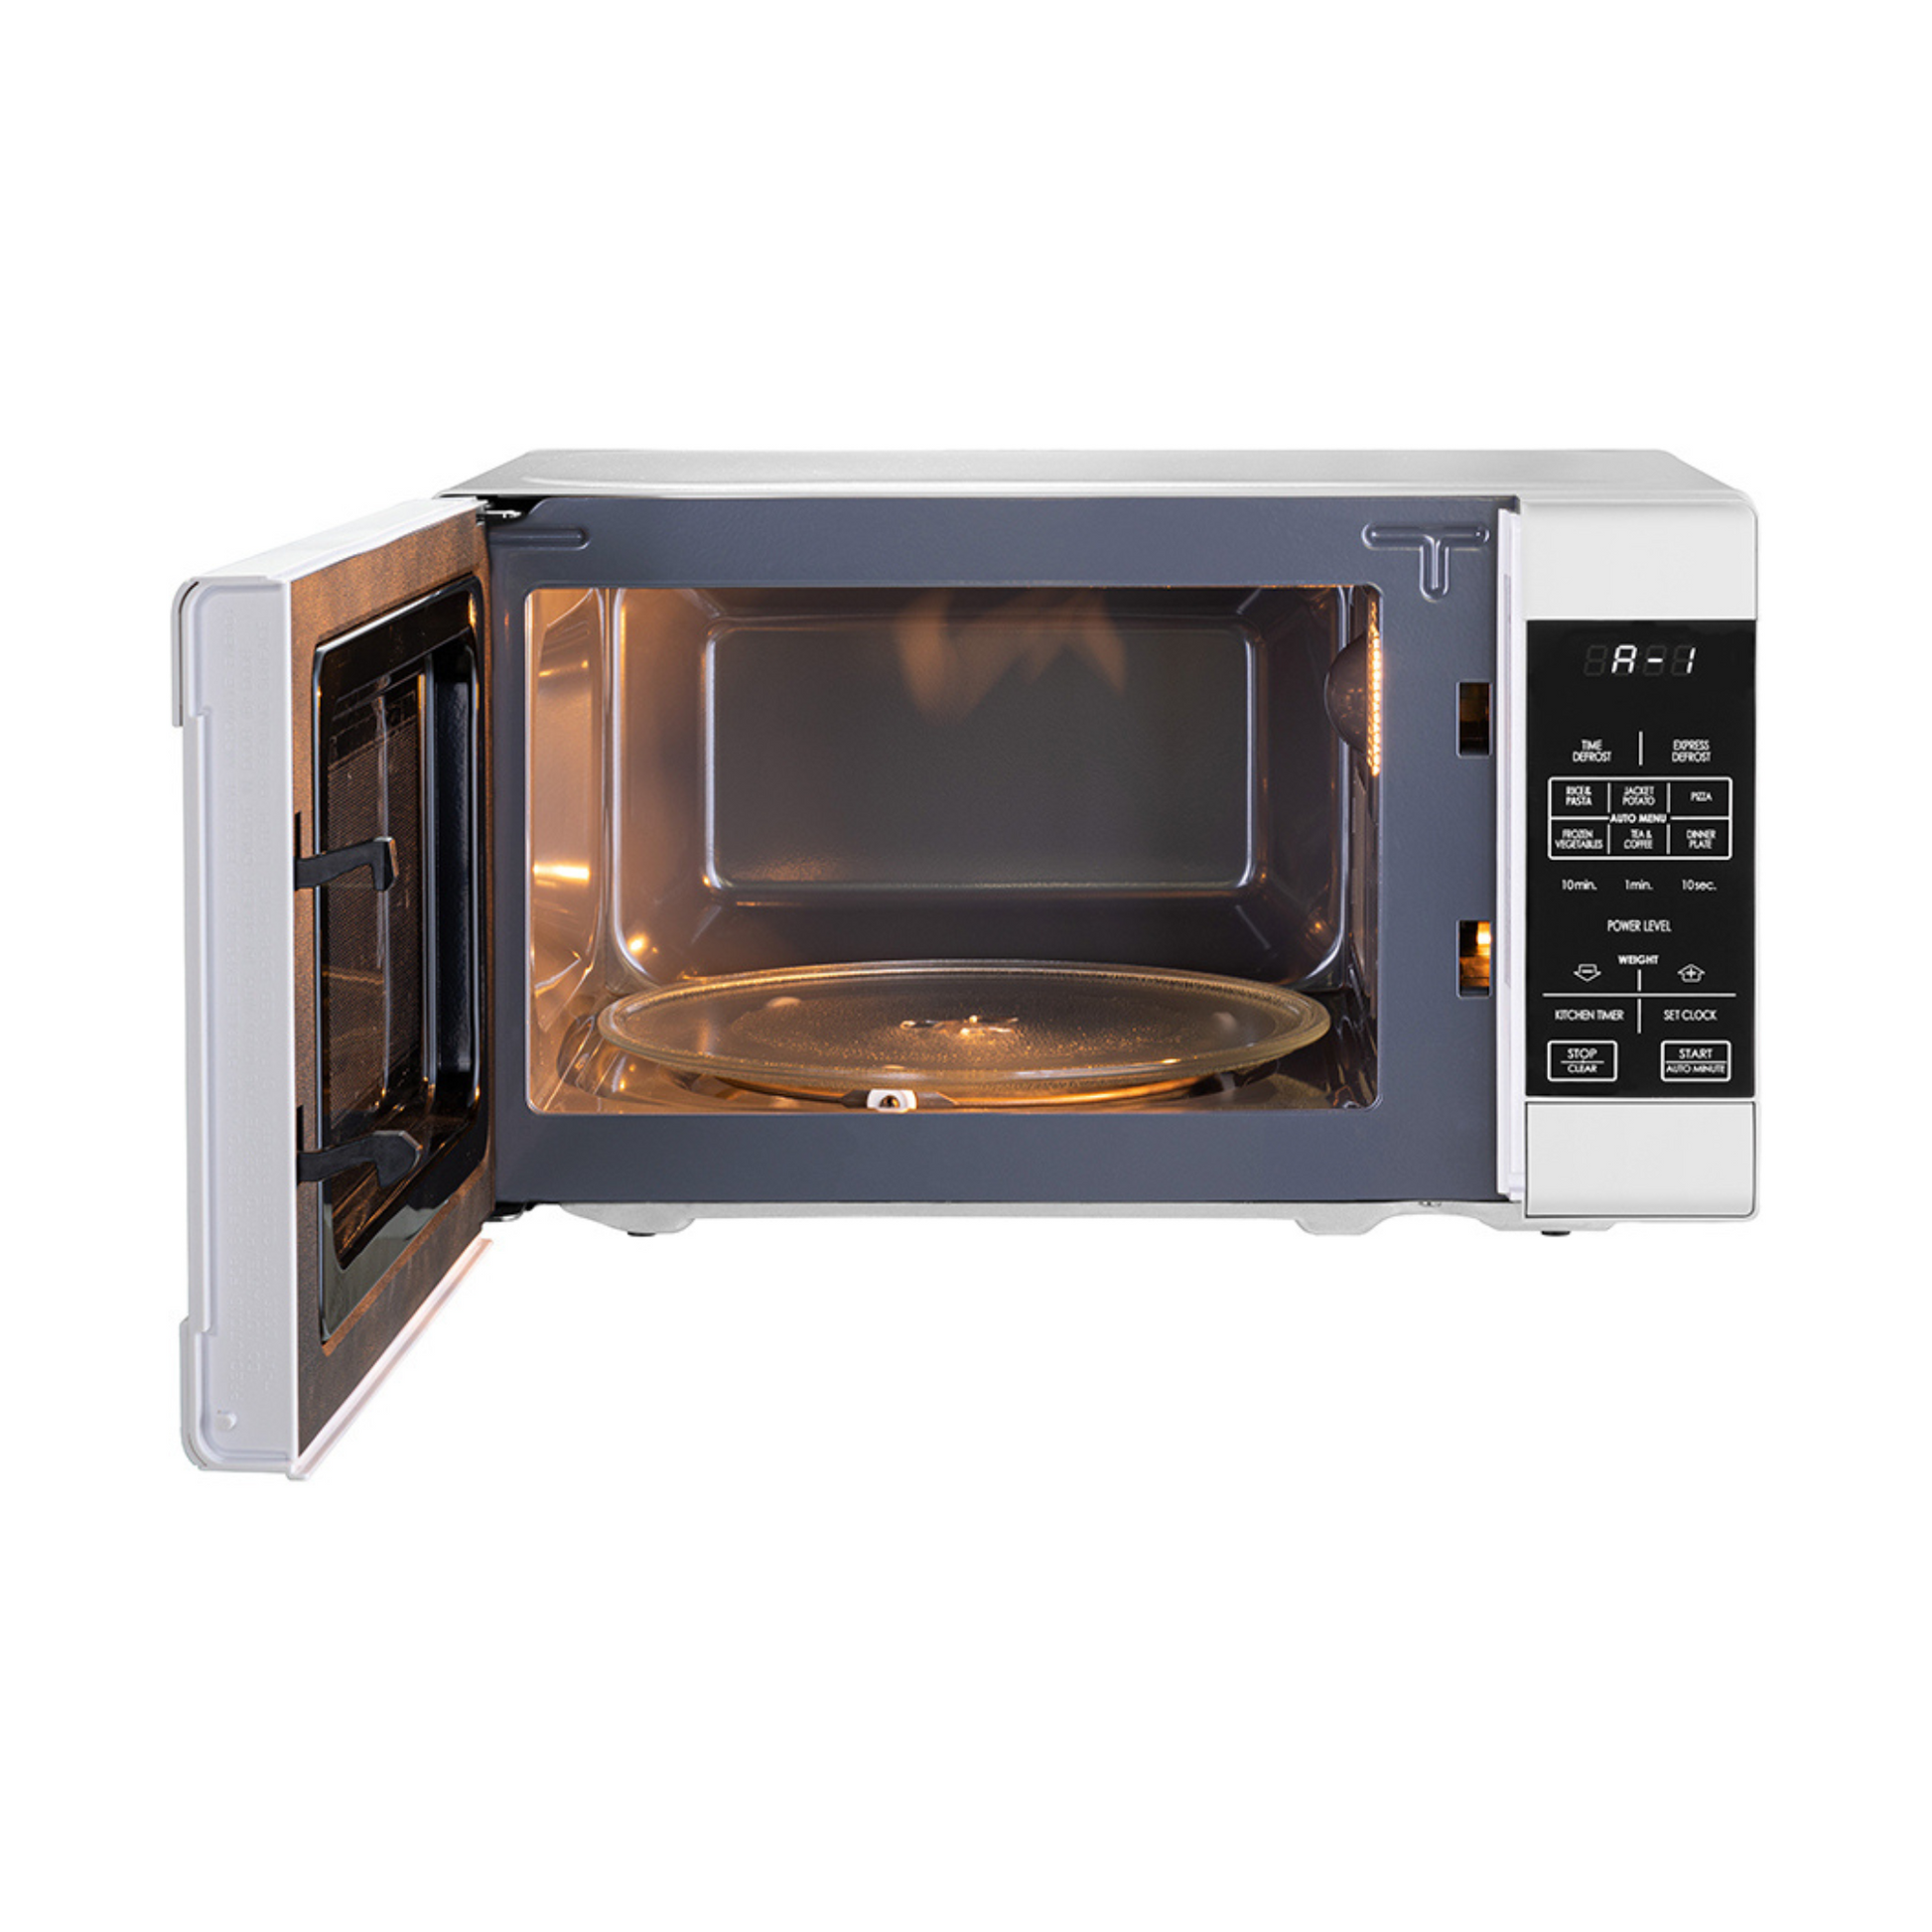 Sharp 20L Microwave Oven, R-211D (W)